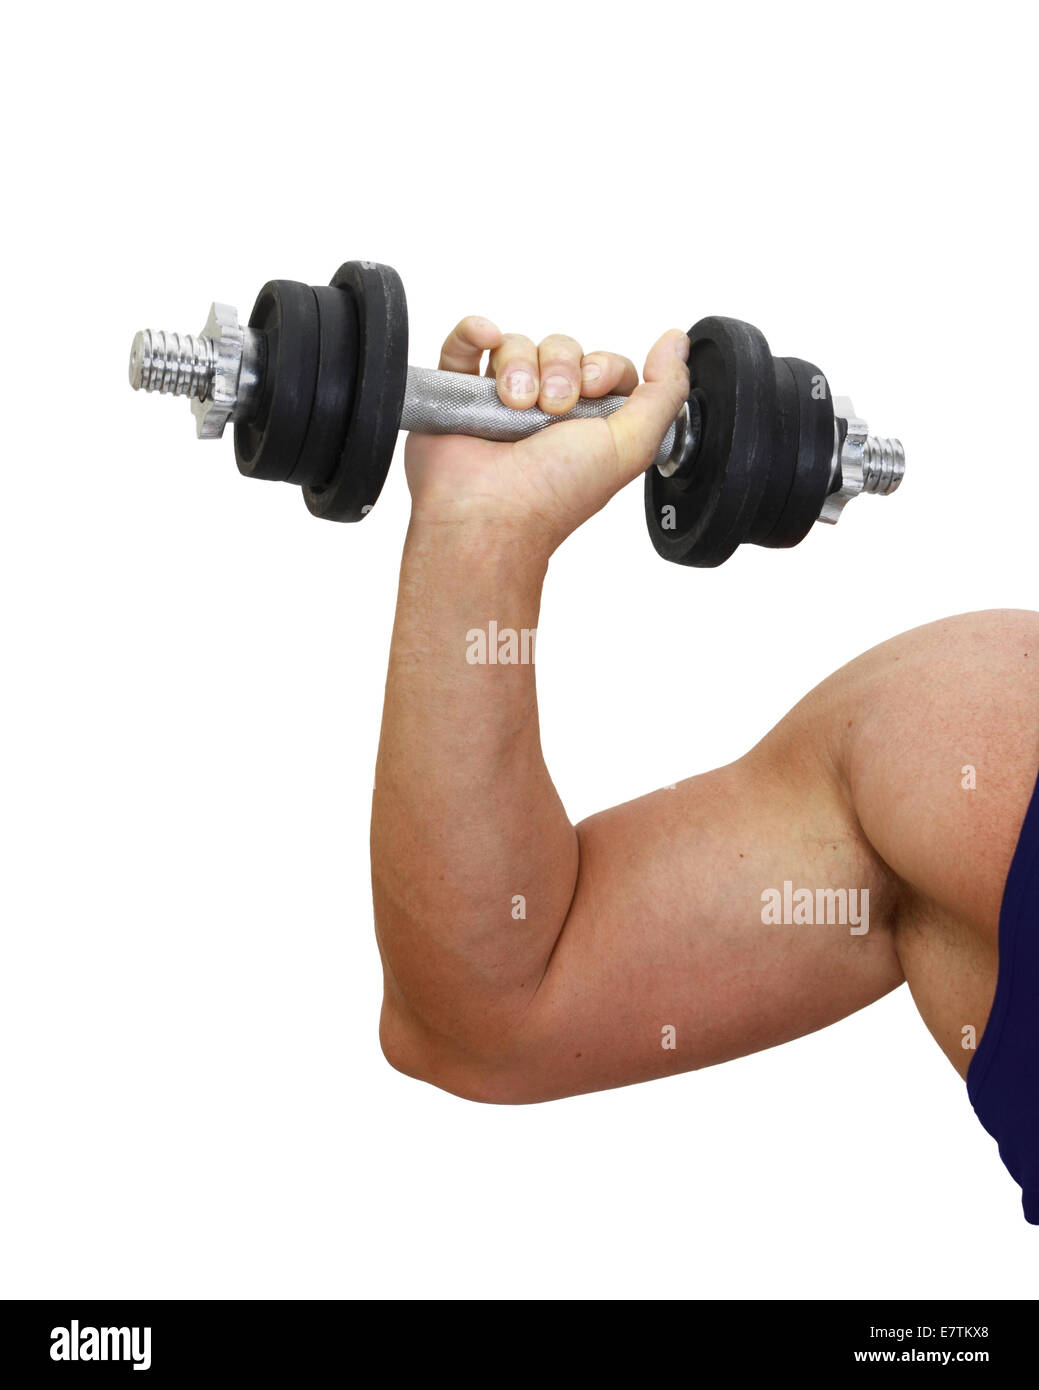 Muscular arm with dumbbell isolated on white background Stock Photo